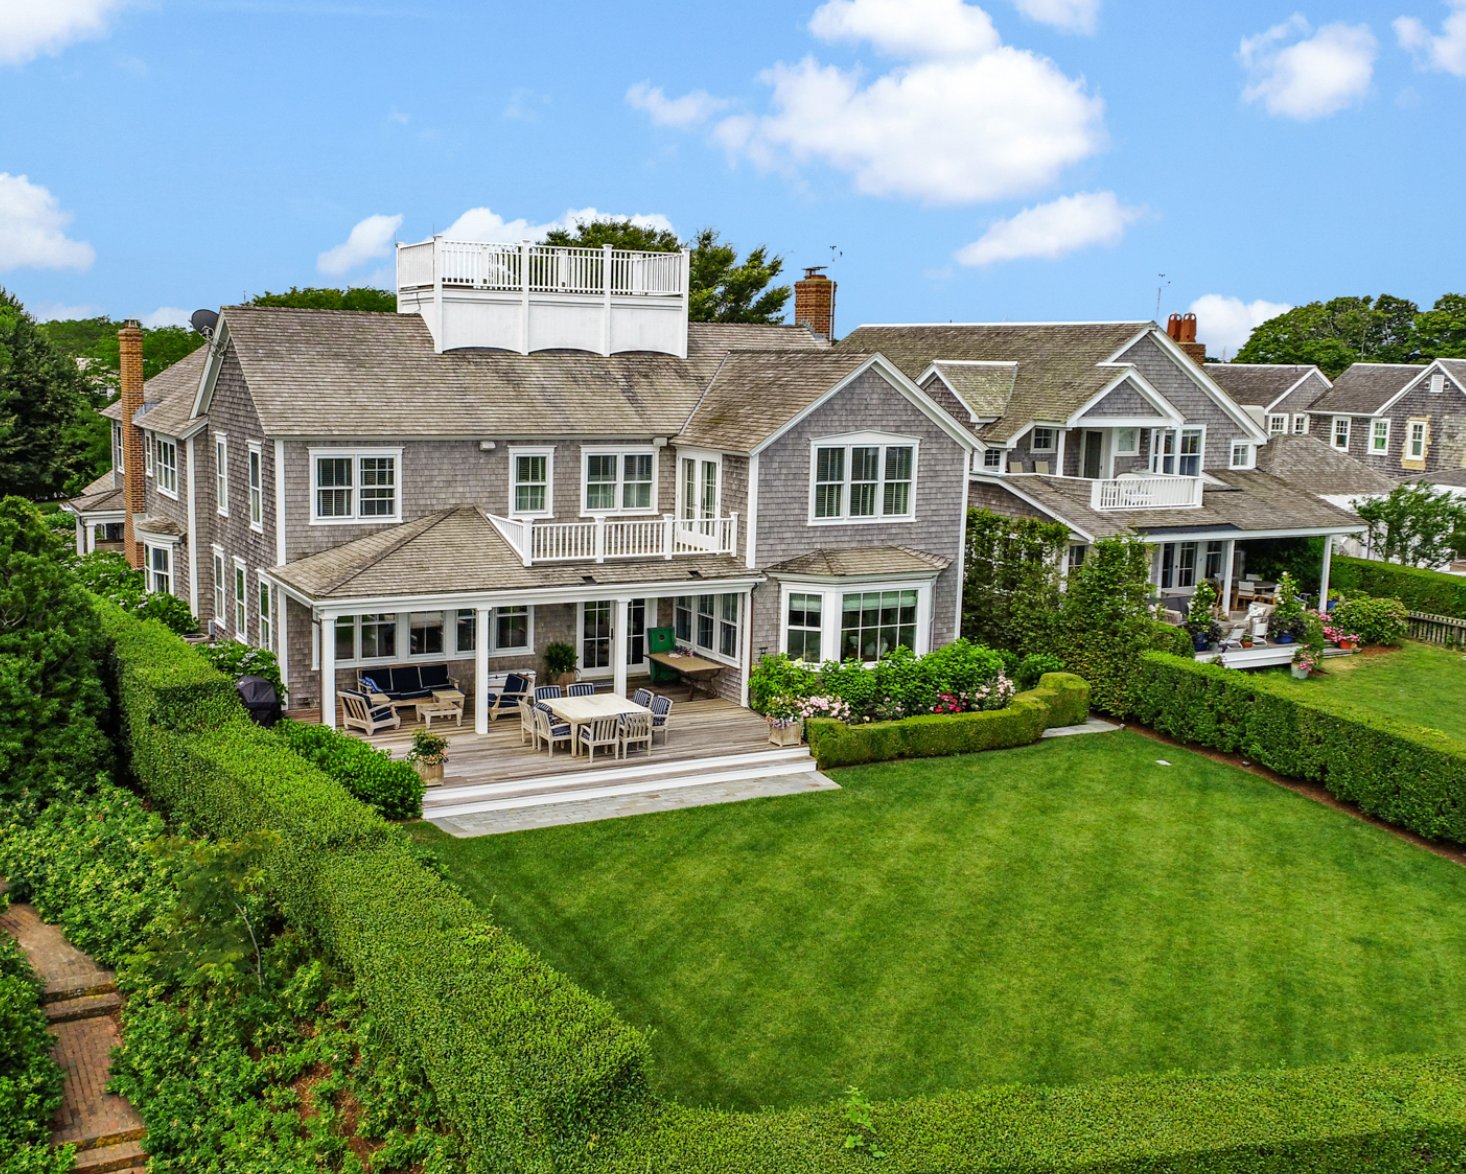 Sitting high in the Cliff Road neighborhood, just off prestigious Lincoln Circle, this seven-bedroom, six-and-two-half-bathroom home has picturesque views of Nantucket Harbor, Nantucket Sound and the far reaches of historic downtown.